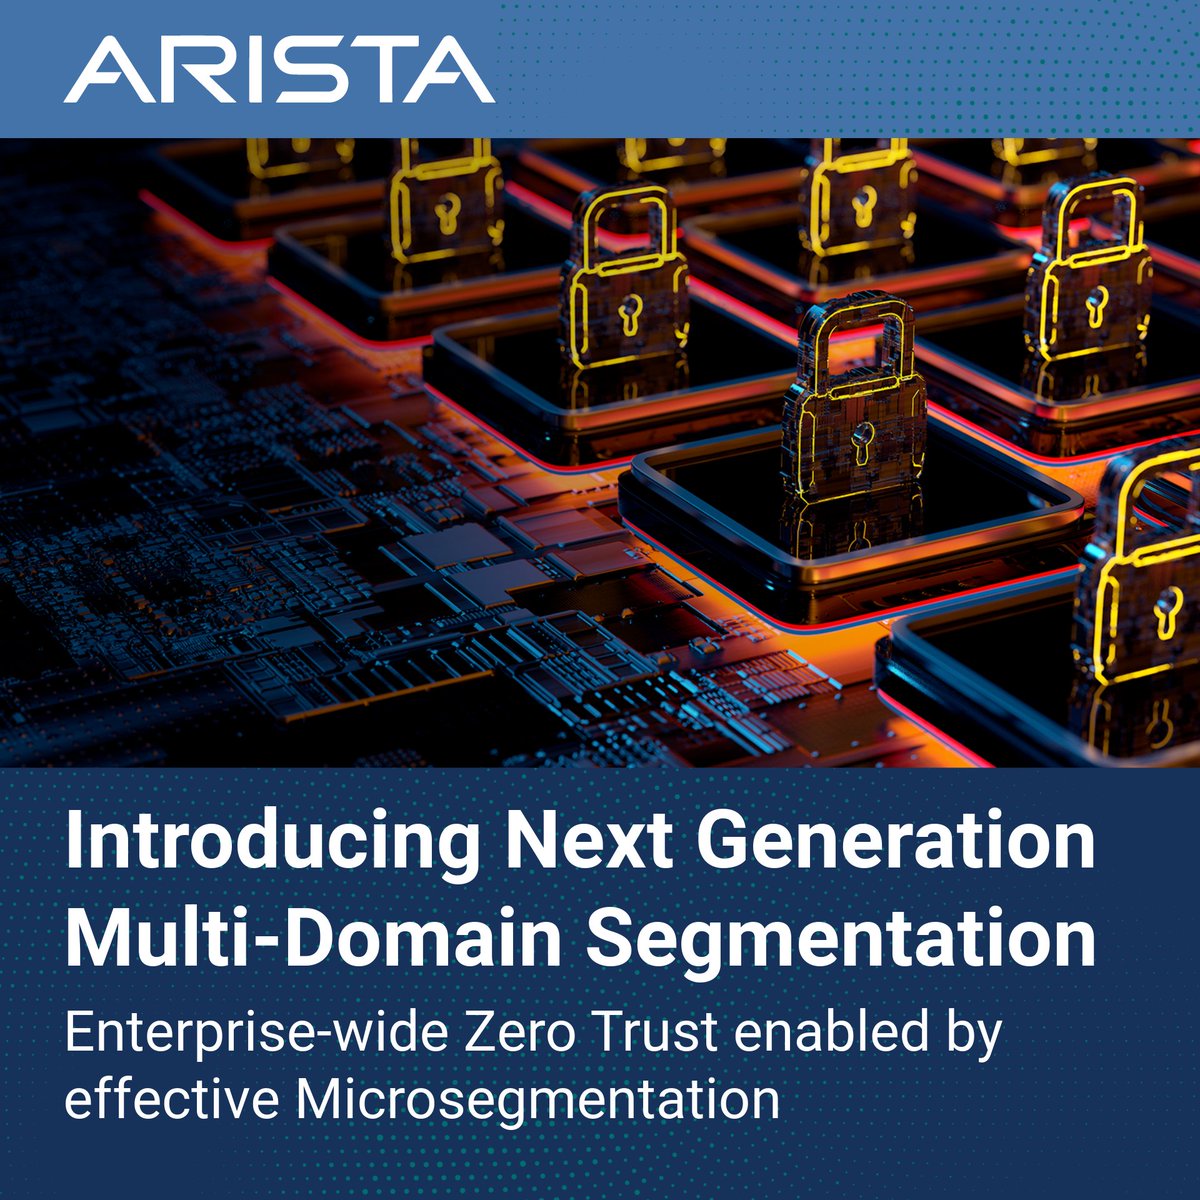 Today Arista launches next generation Multi-Domain Segmentation for Zero Trust Networking. Updates to Arista MSSⓇ (Multi-Domain Segmentation Service) address the challenge of creating a truly enterprise-wide zero trust network. Learn more here: bit.ly/3w6foEi…